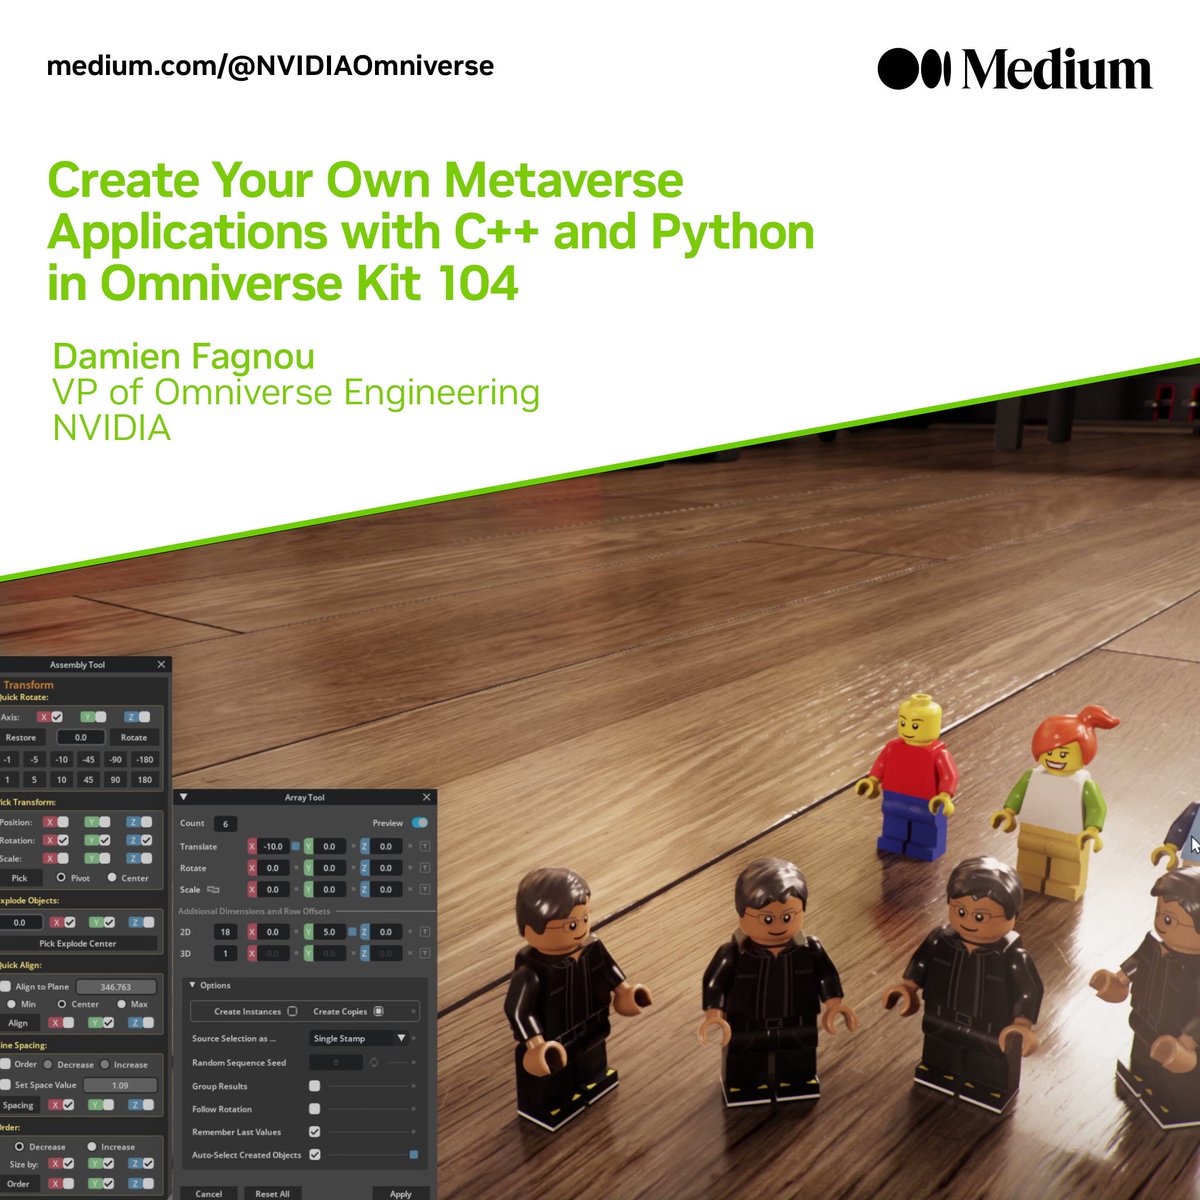 #NVIDIAOmniverse Kit 104 brings exciting updates that allow C++ & #Python developers to more easily create, package, and publish #metaverse applications. 📔  